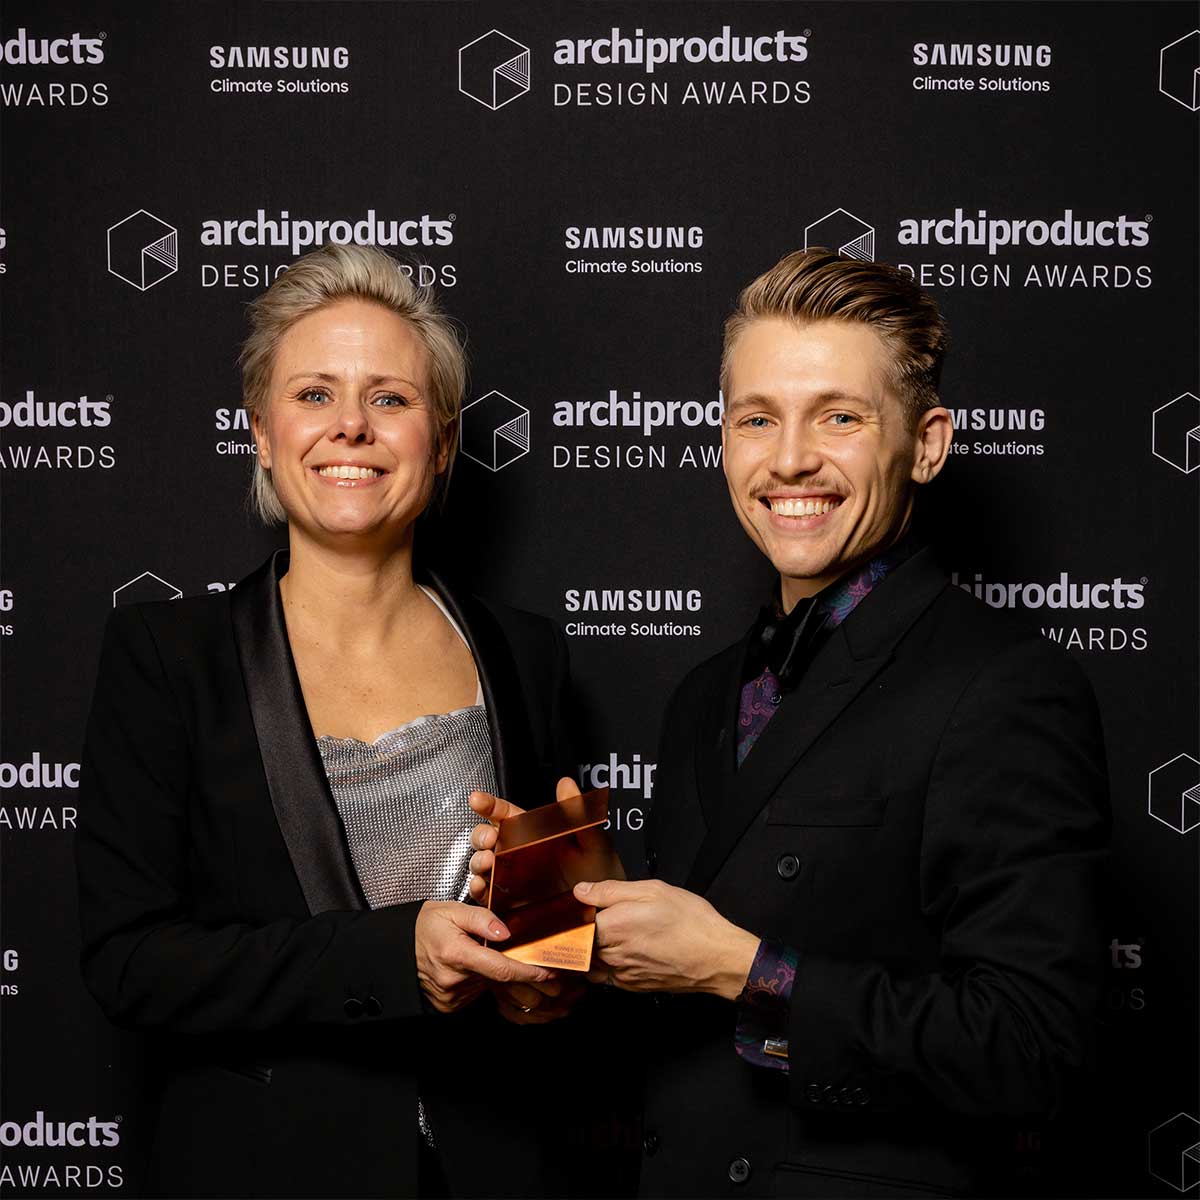 Malin from Mizetto and Karl-Magnus from ADDI at the archiproducts awards